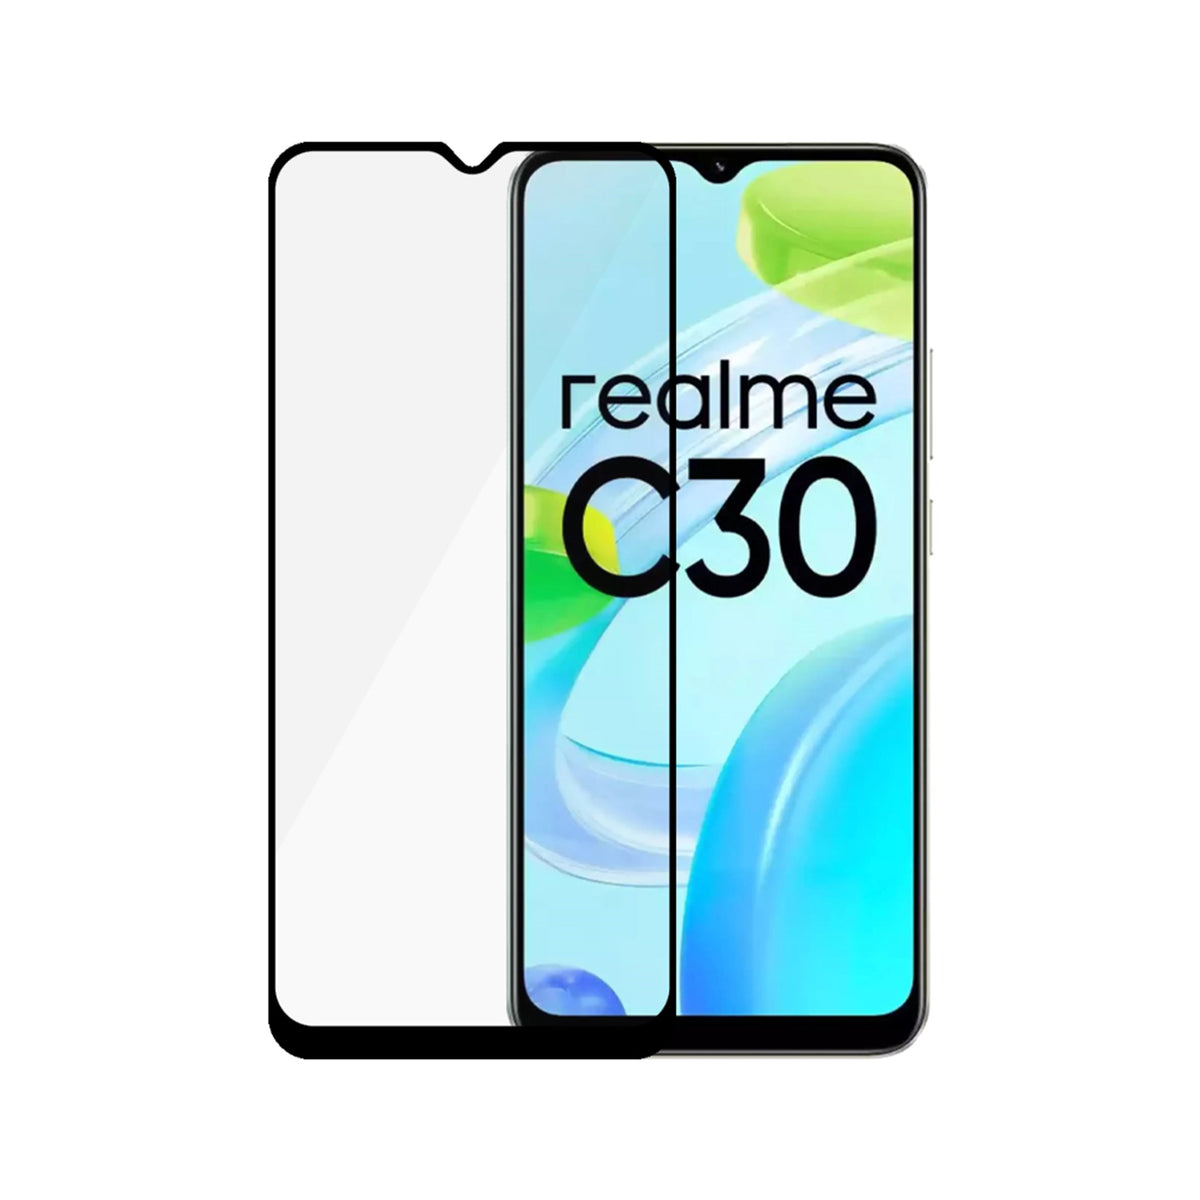 SAFE. by PanzerGlass™ Realme C30 | Screen Protector Glass 2